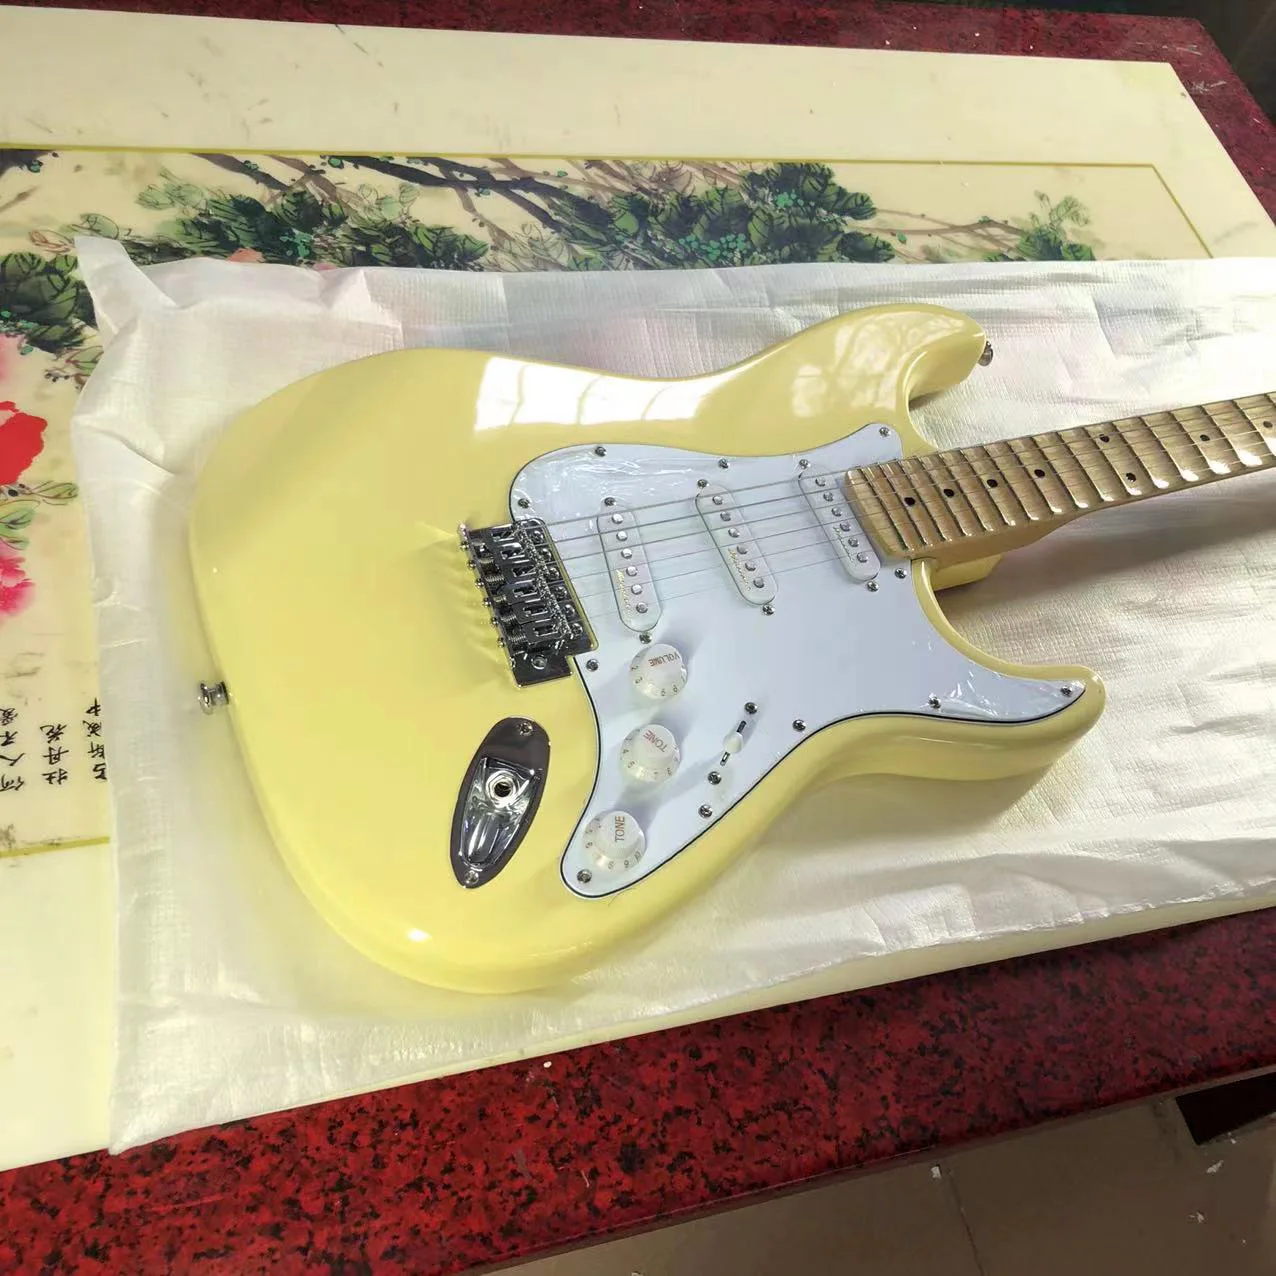 

Yngwie Malmsteen Cream Yellow ST Electric Guitars , Scalloped 22 Frets groove Maple Fingerboard,DAddario strings,Canada nut